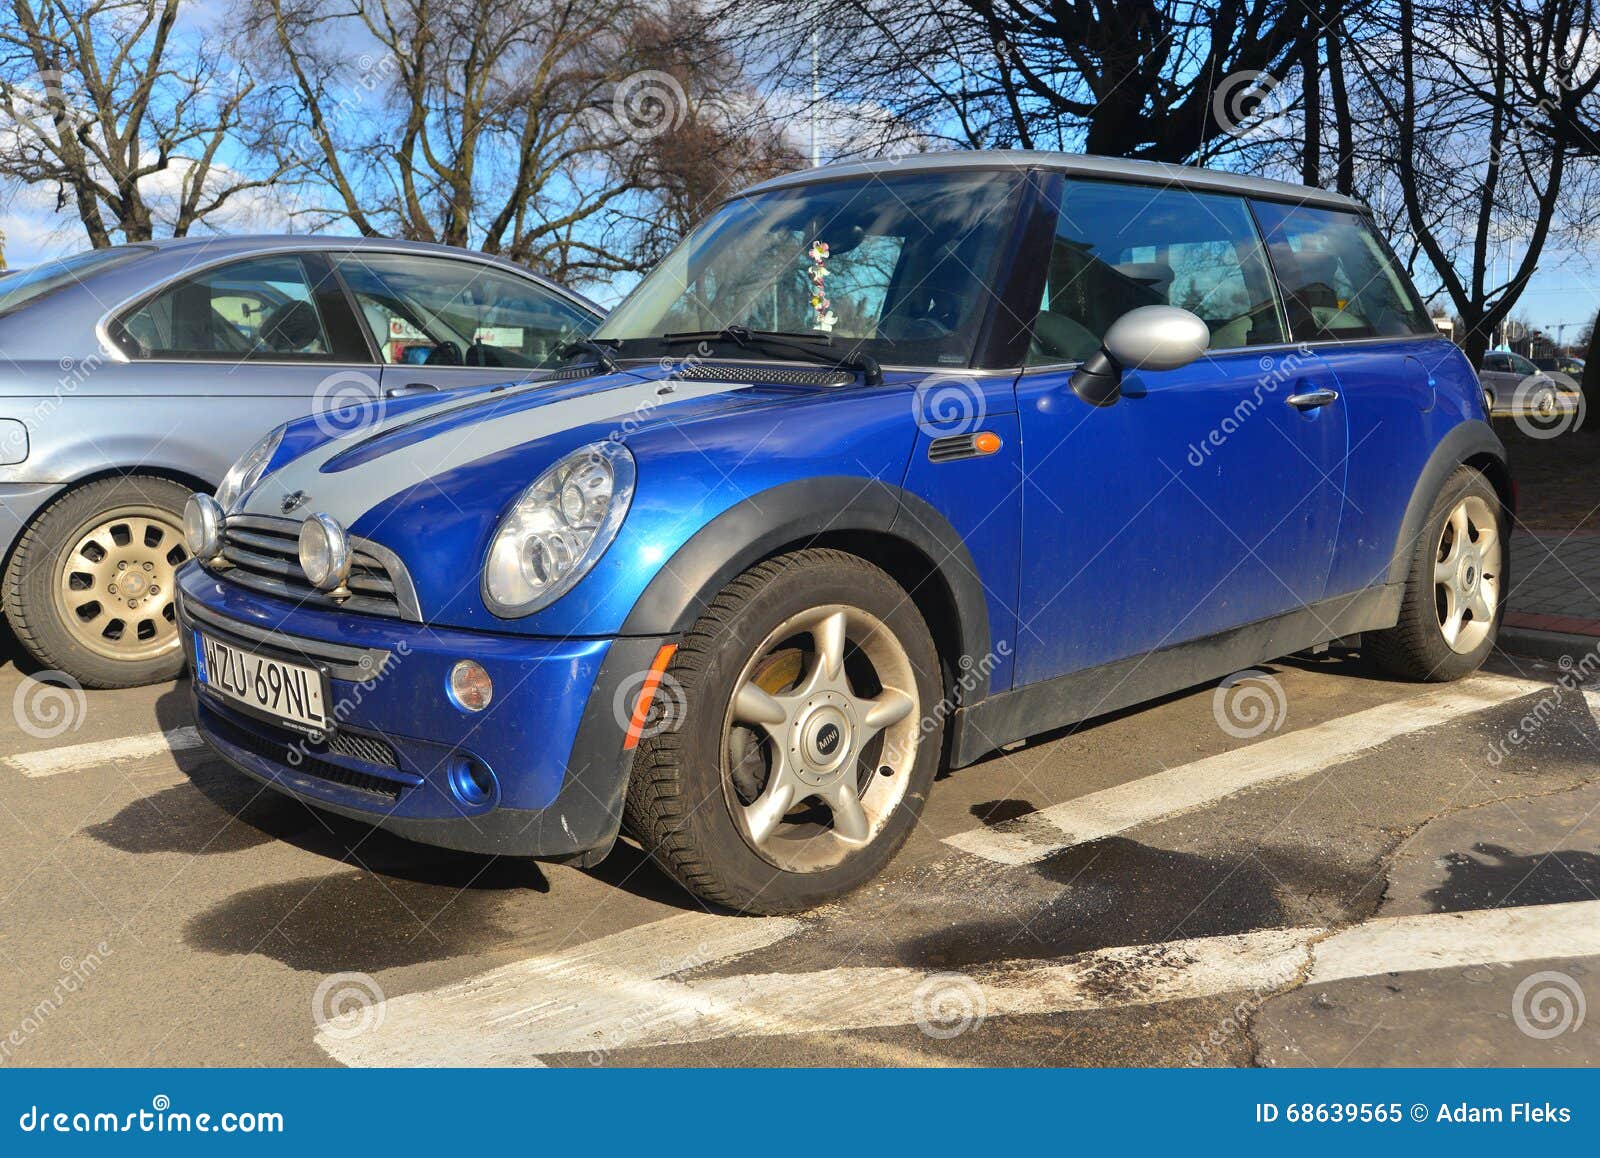 Mini Cooper Parked in Gdansk, Poland Editorial Image - Image of ...